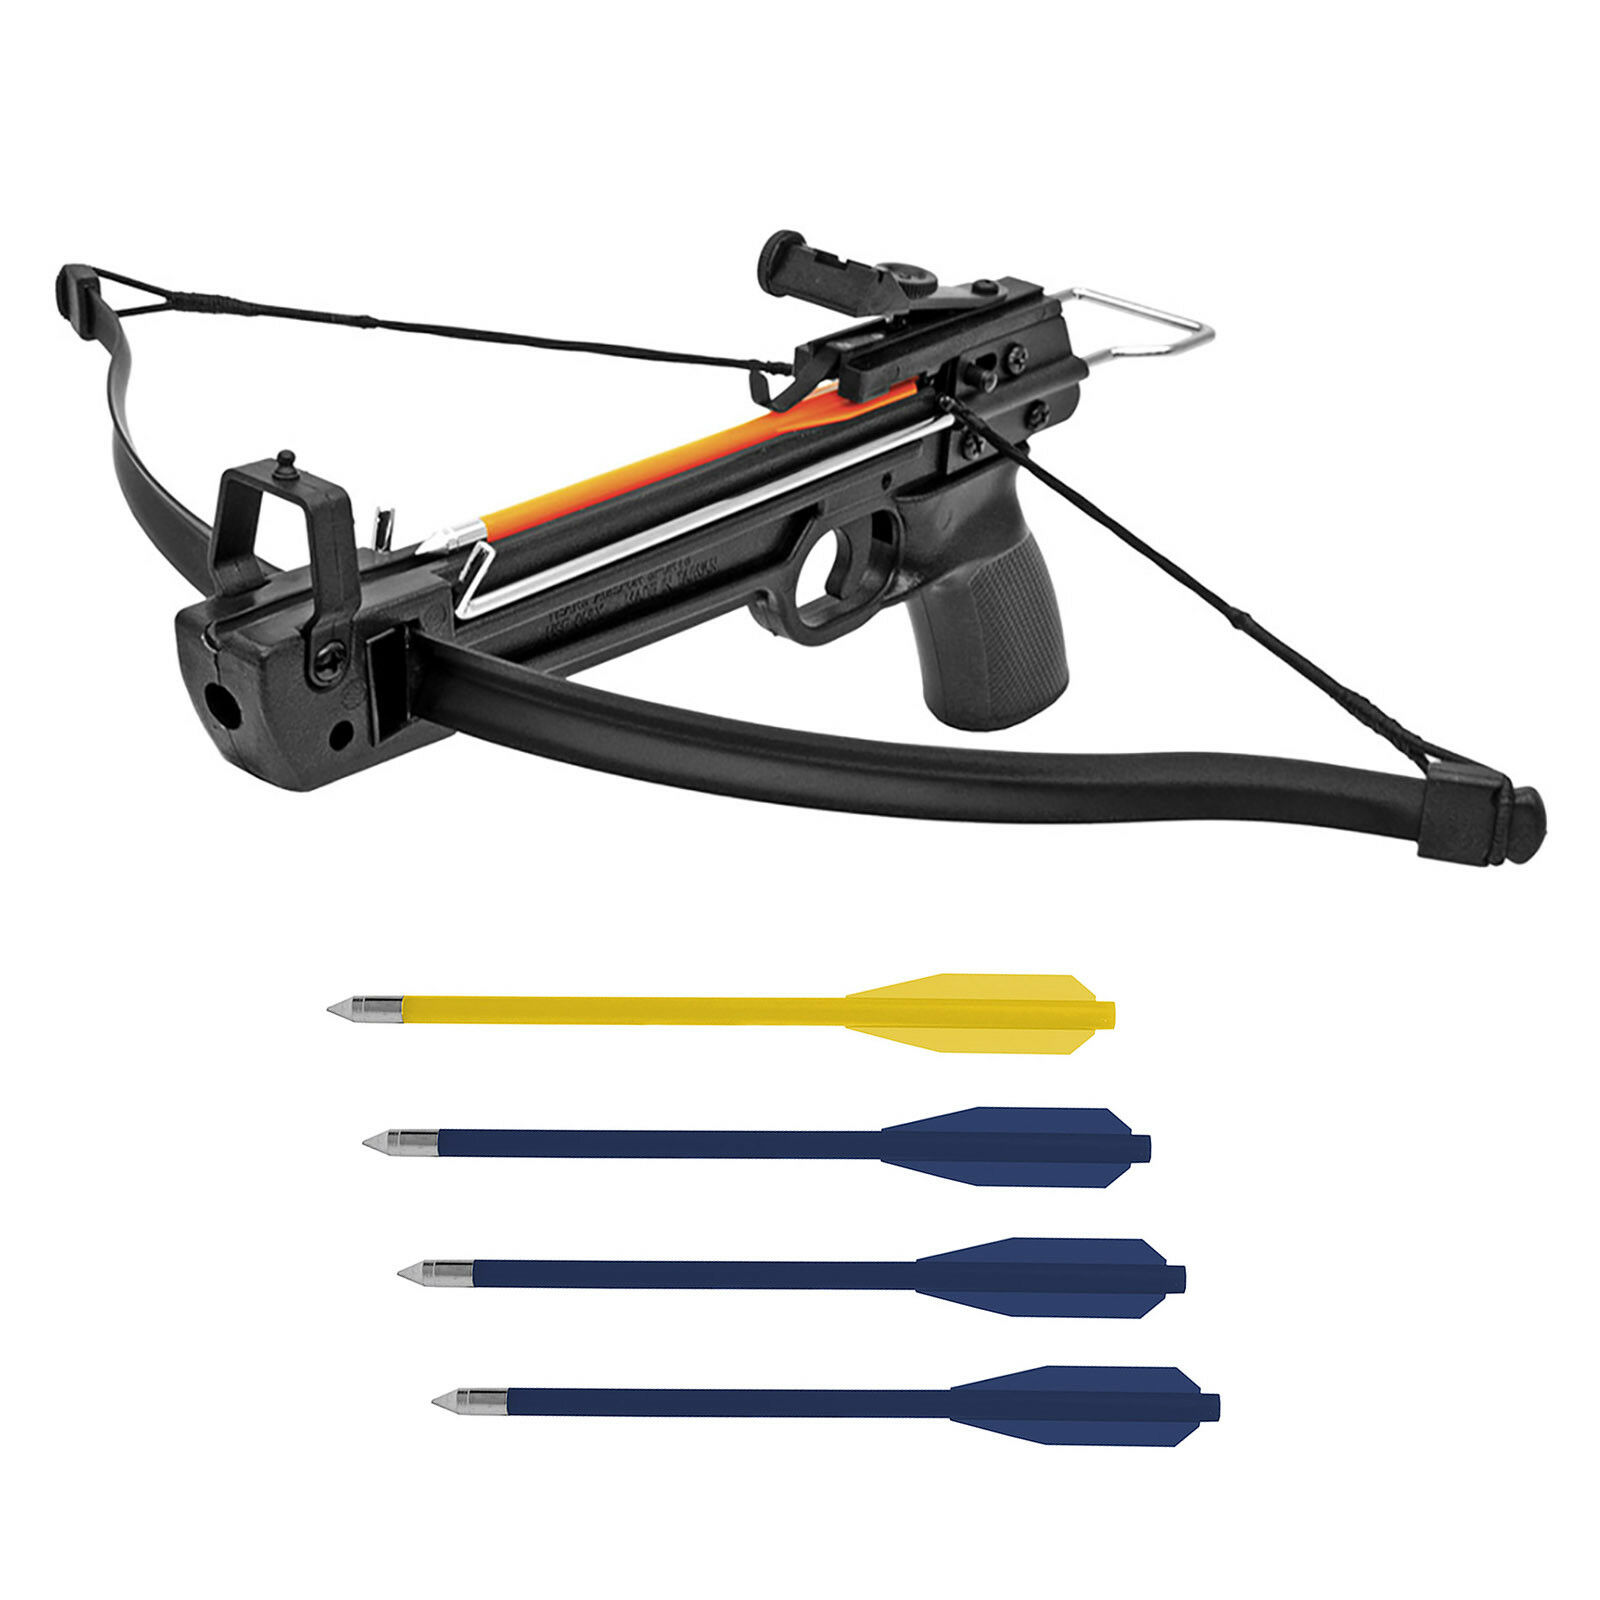 https://econosuperstore.com/wp-content/uploads/imported/2/50-lb-Mini-Crossbow-Pistol-w-5-Bolts-Hand-Held-Archery-Hunting-Cross-Bow-Arrows-202435511732.JPG